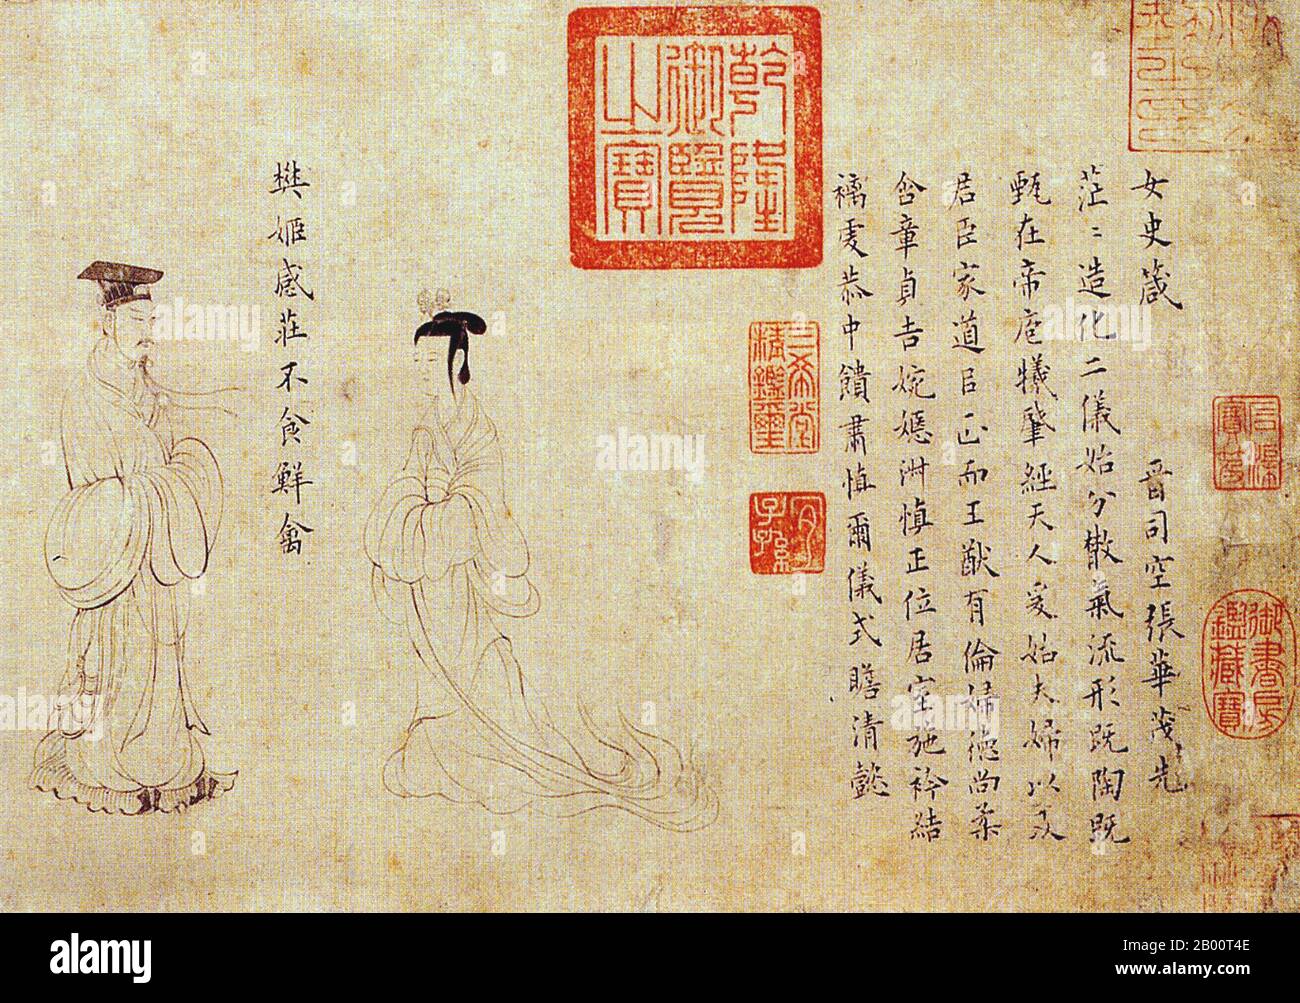 China: The Admonitions Scroll, Scene 1 - Introduction (Beijing Palace Museum copy).  The Admonitions Scroll is a Chinese narrative painting on silk that is traditionally ascribed to Gu Kaizhi  (c.345-c.406 CE), but which modern scholarship regards as a 5th to 8th century work that may be a copy of an original Jin Dynasty (265–420 CE) court painting by Gu Kaizhi. The full title of the painting is Admonitions of the Court Instructress (Chinese: Nushi Zhentu). It was painted to illustrate a poetic text written in 292 by the poet-official Zhang Hua (232–300). Stock Photo